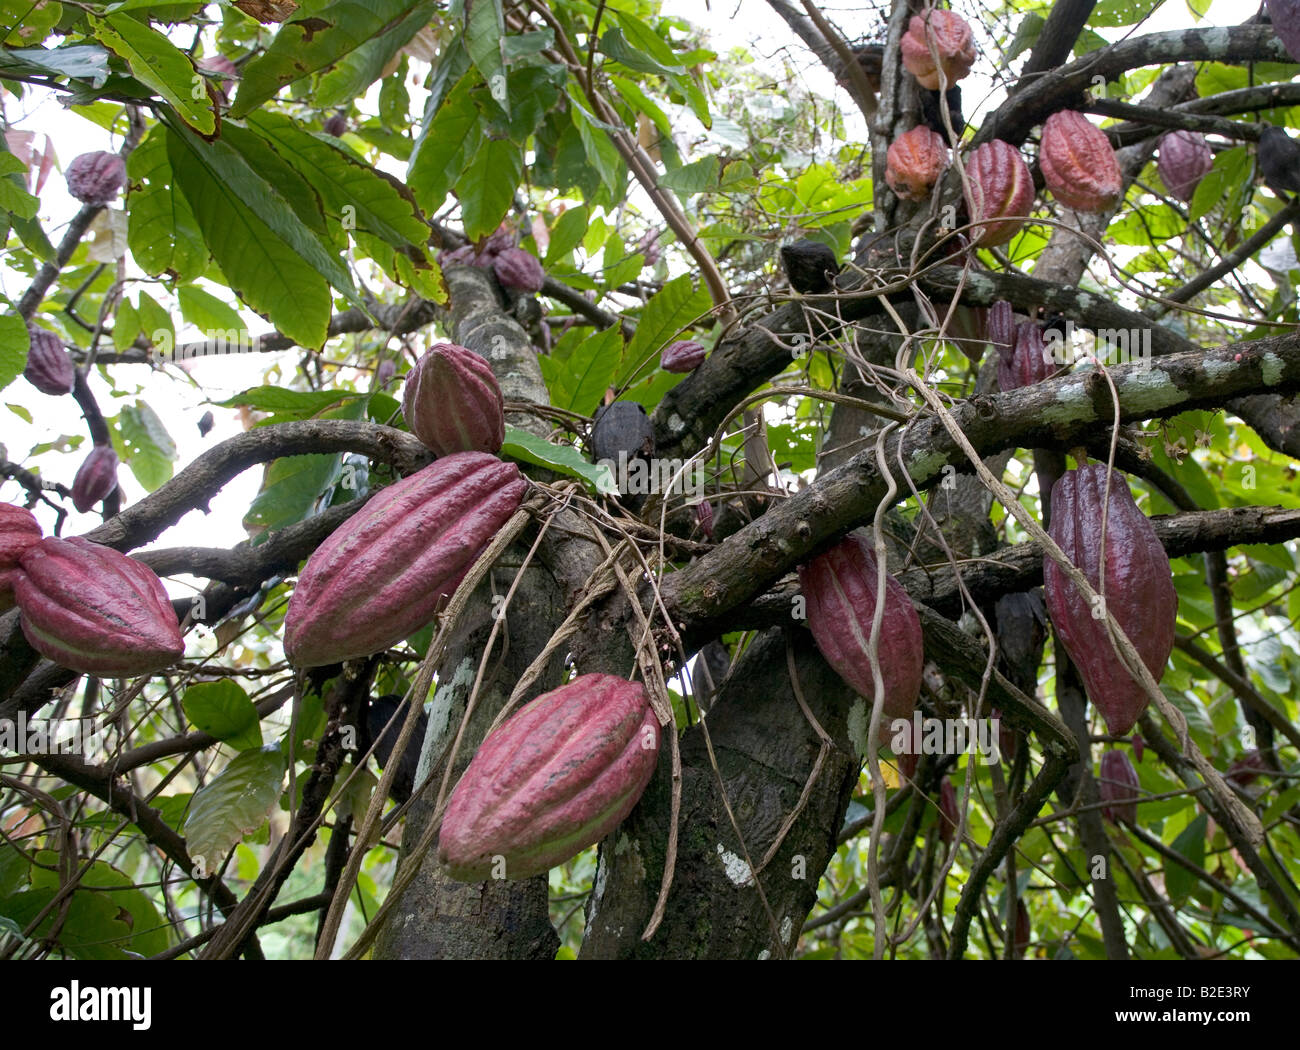 Cocoa pods or nuts growing in a tree on a plantation in the Caribbean The seeds inside are called beans Stock Photo